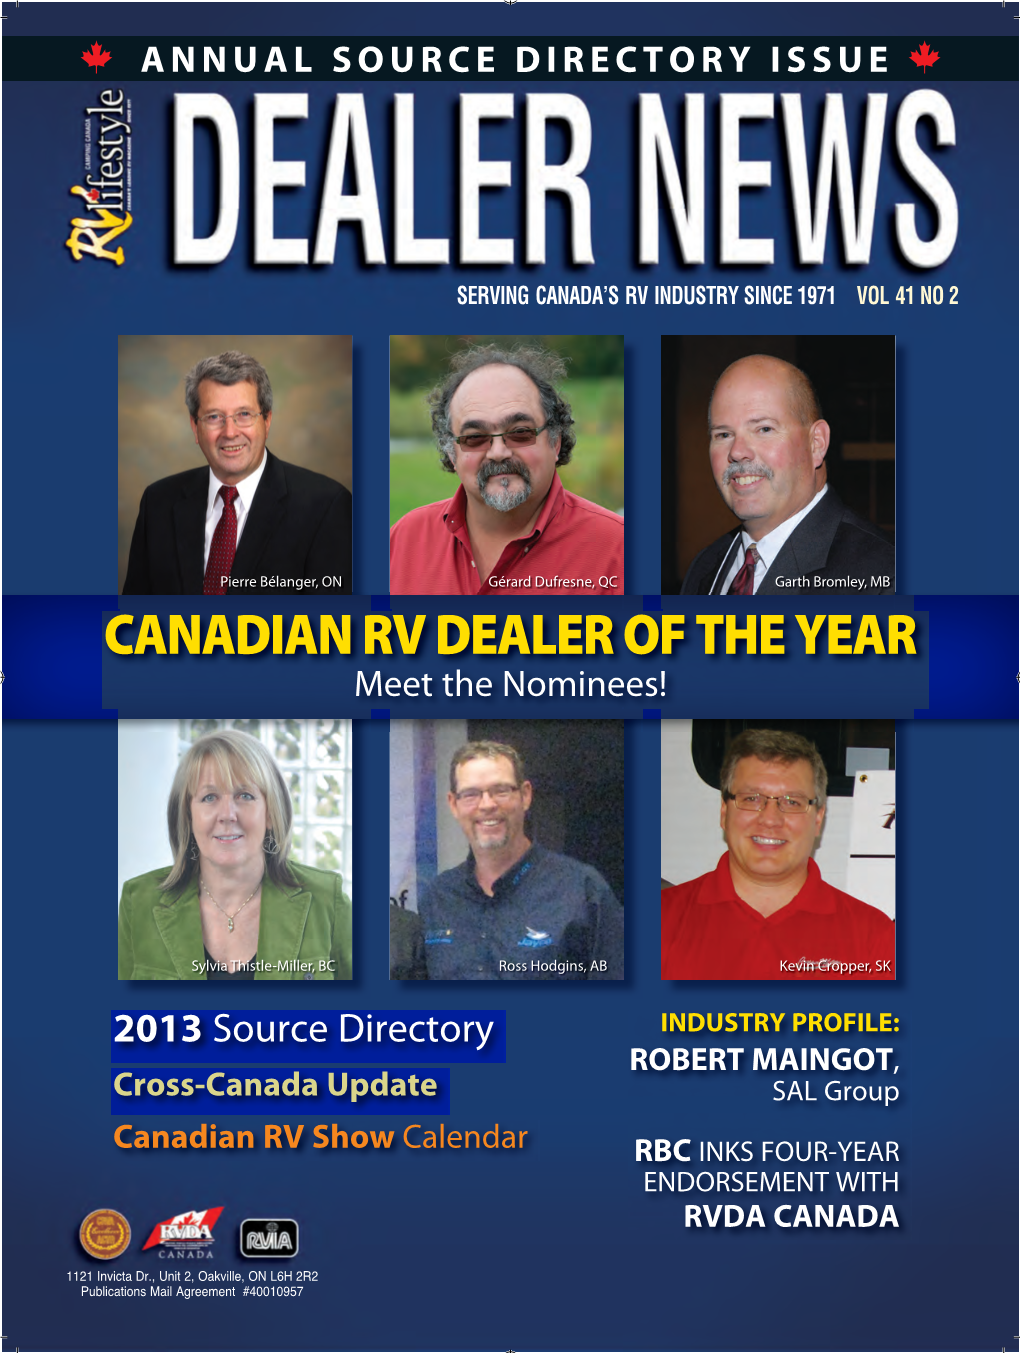 CANADIAN RV DEALER of the YEAR Meet the Nominees!